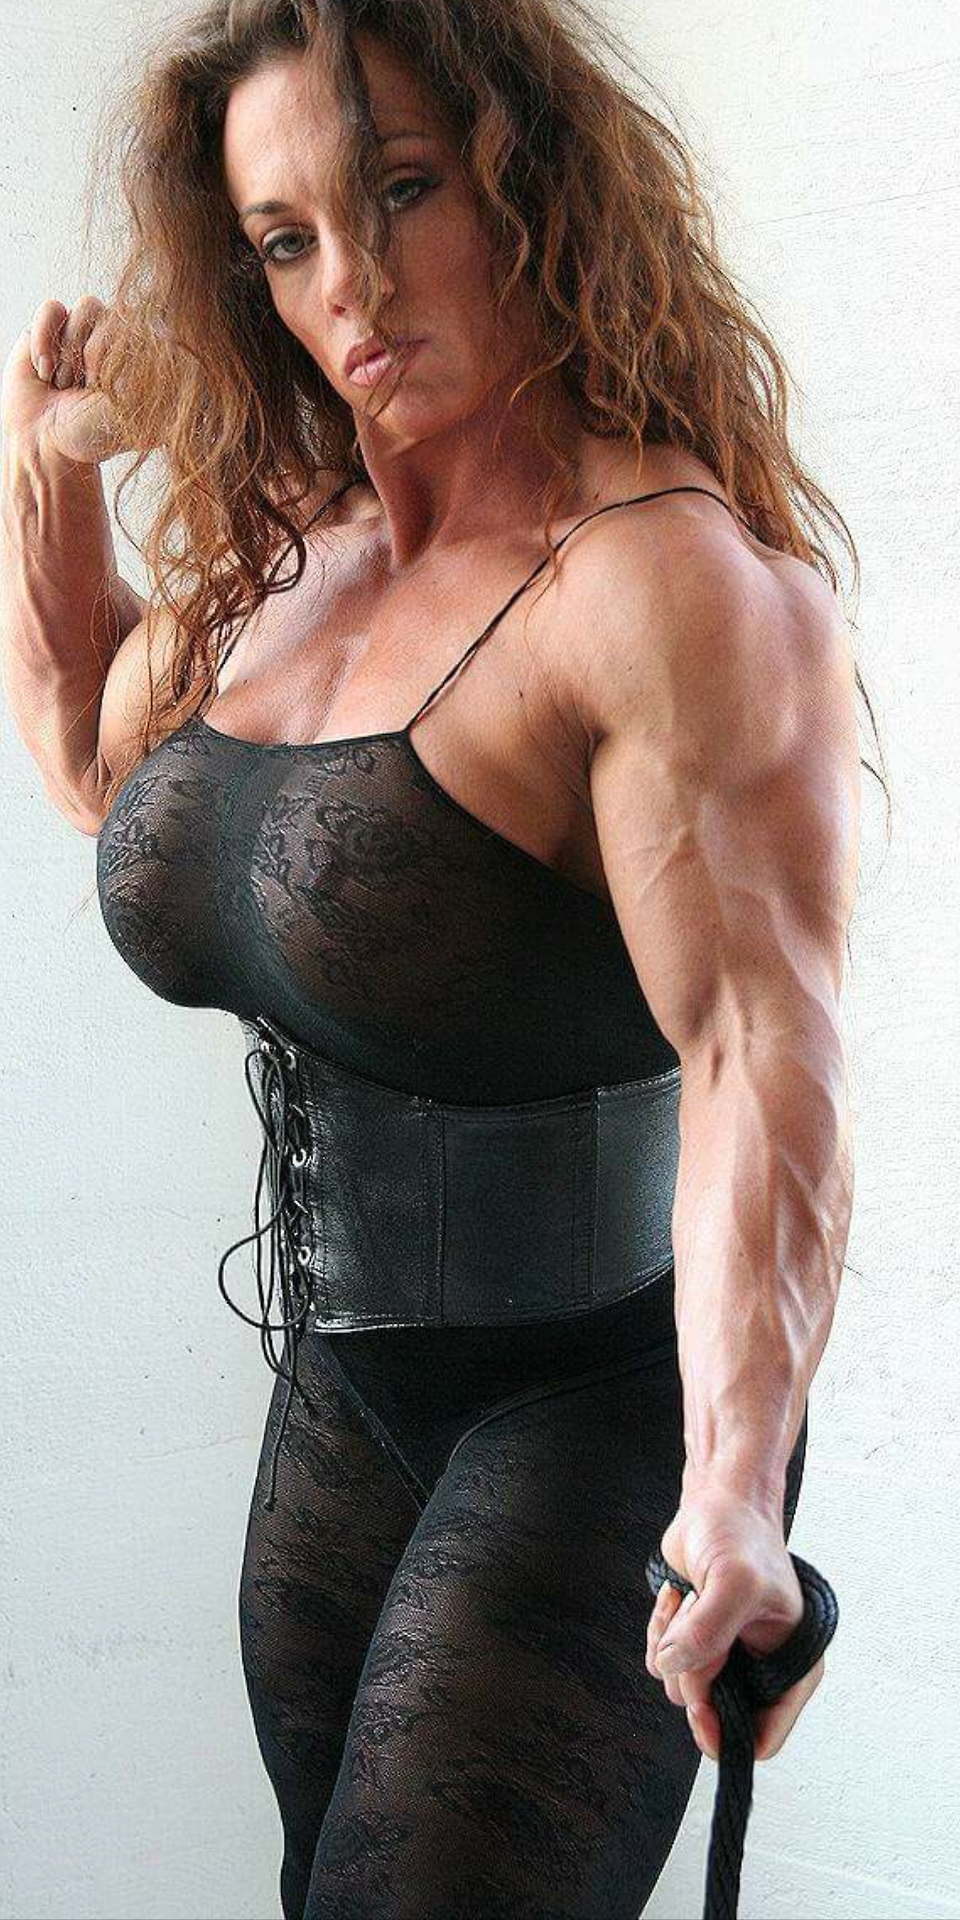 Laurie steele muscle